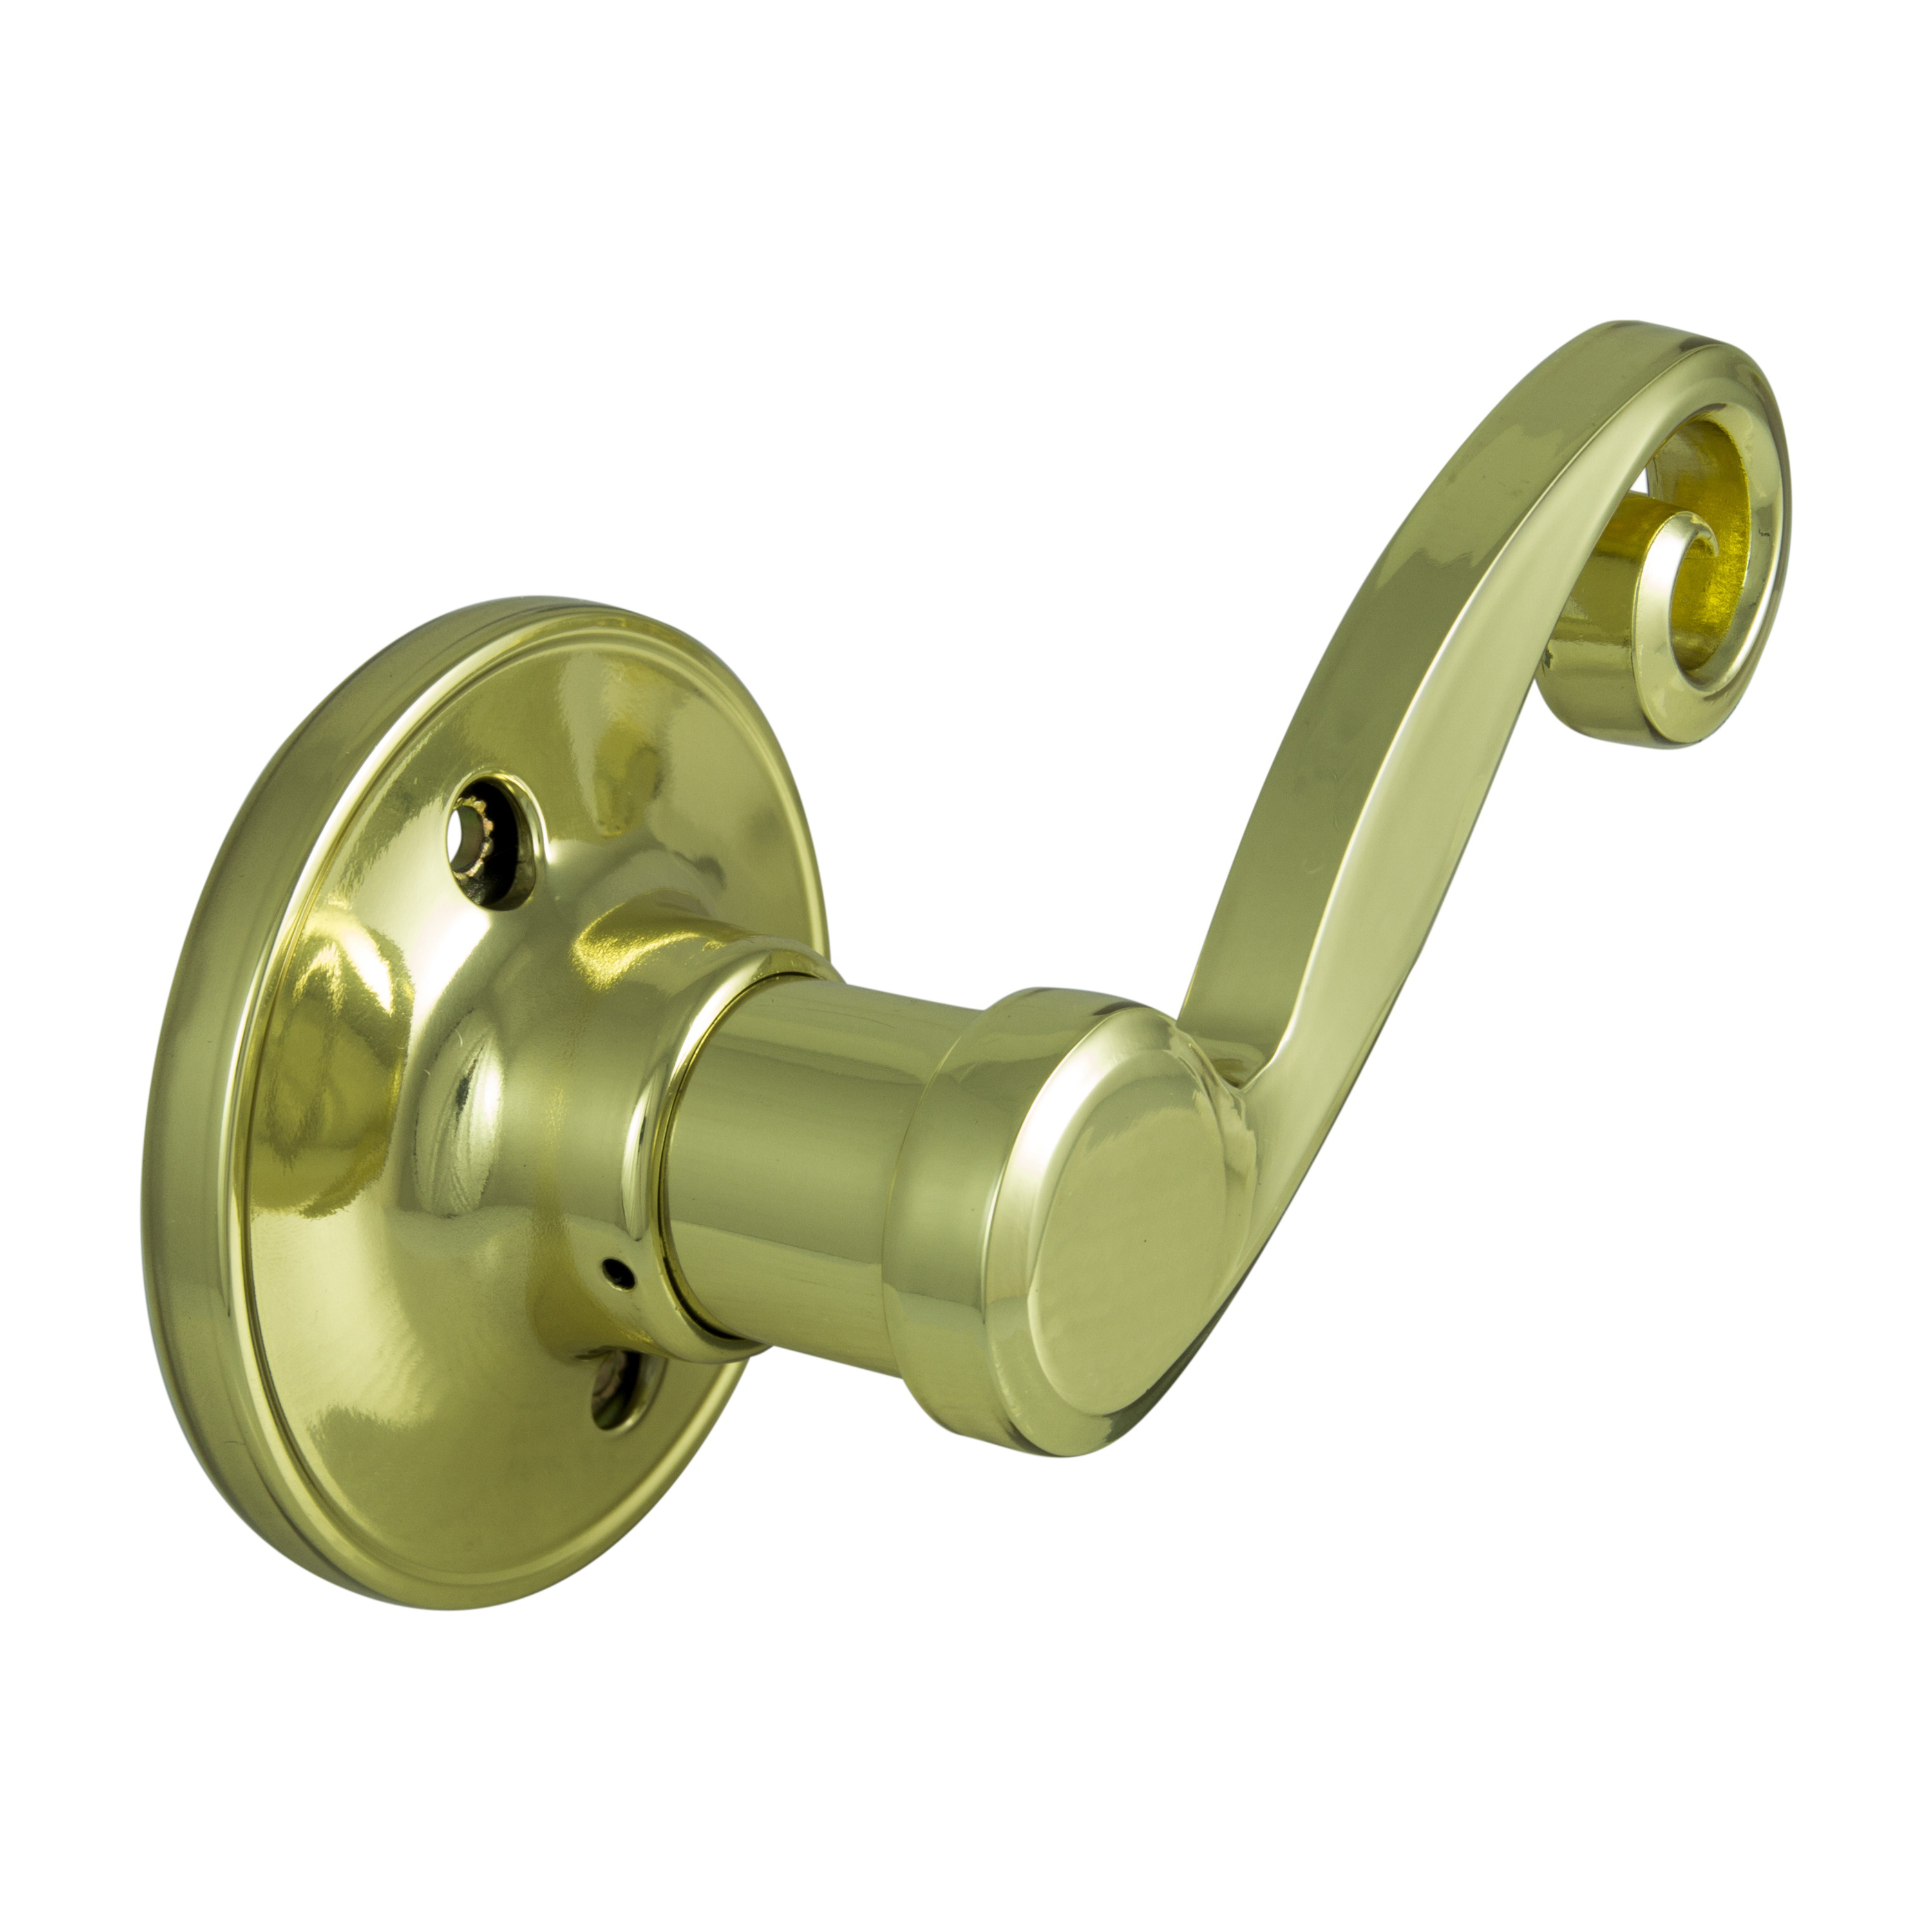 L6704RV-PS Dummy Lever, Zinc, Polished Brass, 3 Grade, Reversible Hand